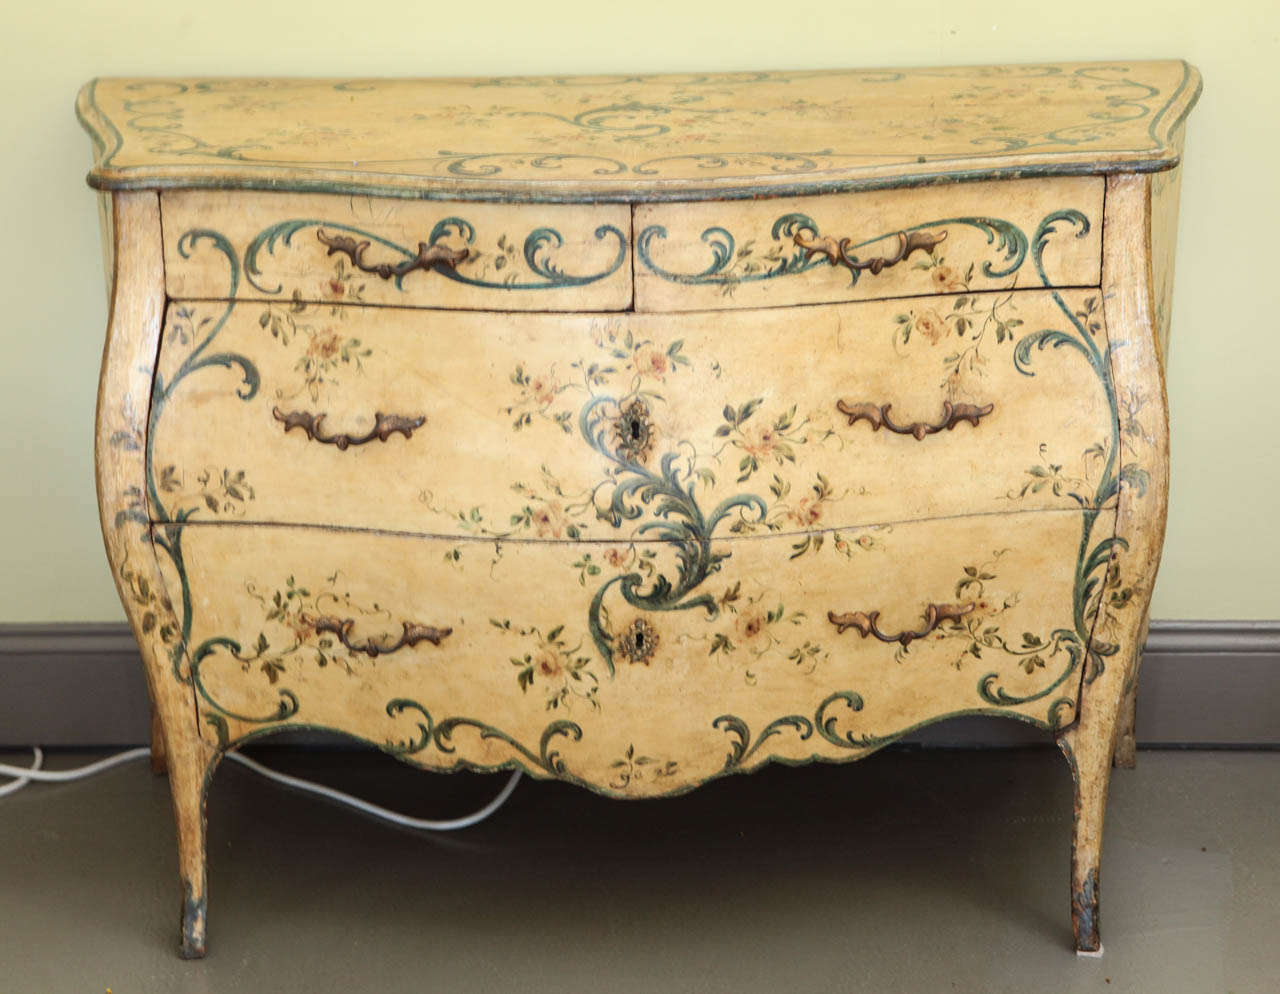 An Italian painted three-drawer commode, early 19th century with later decoration.